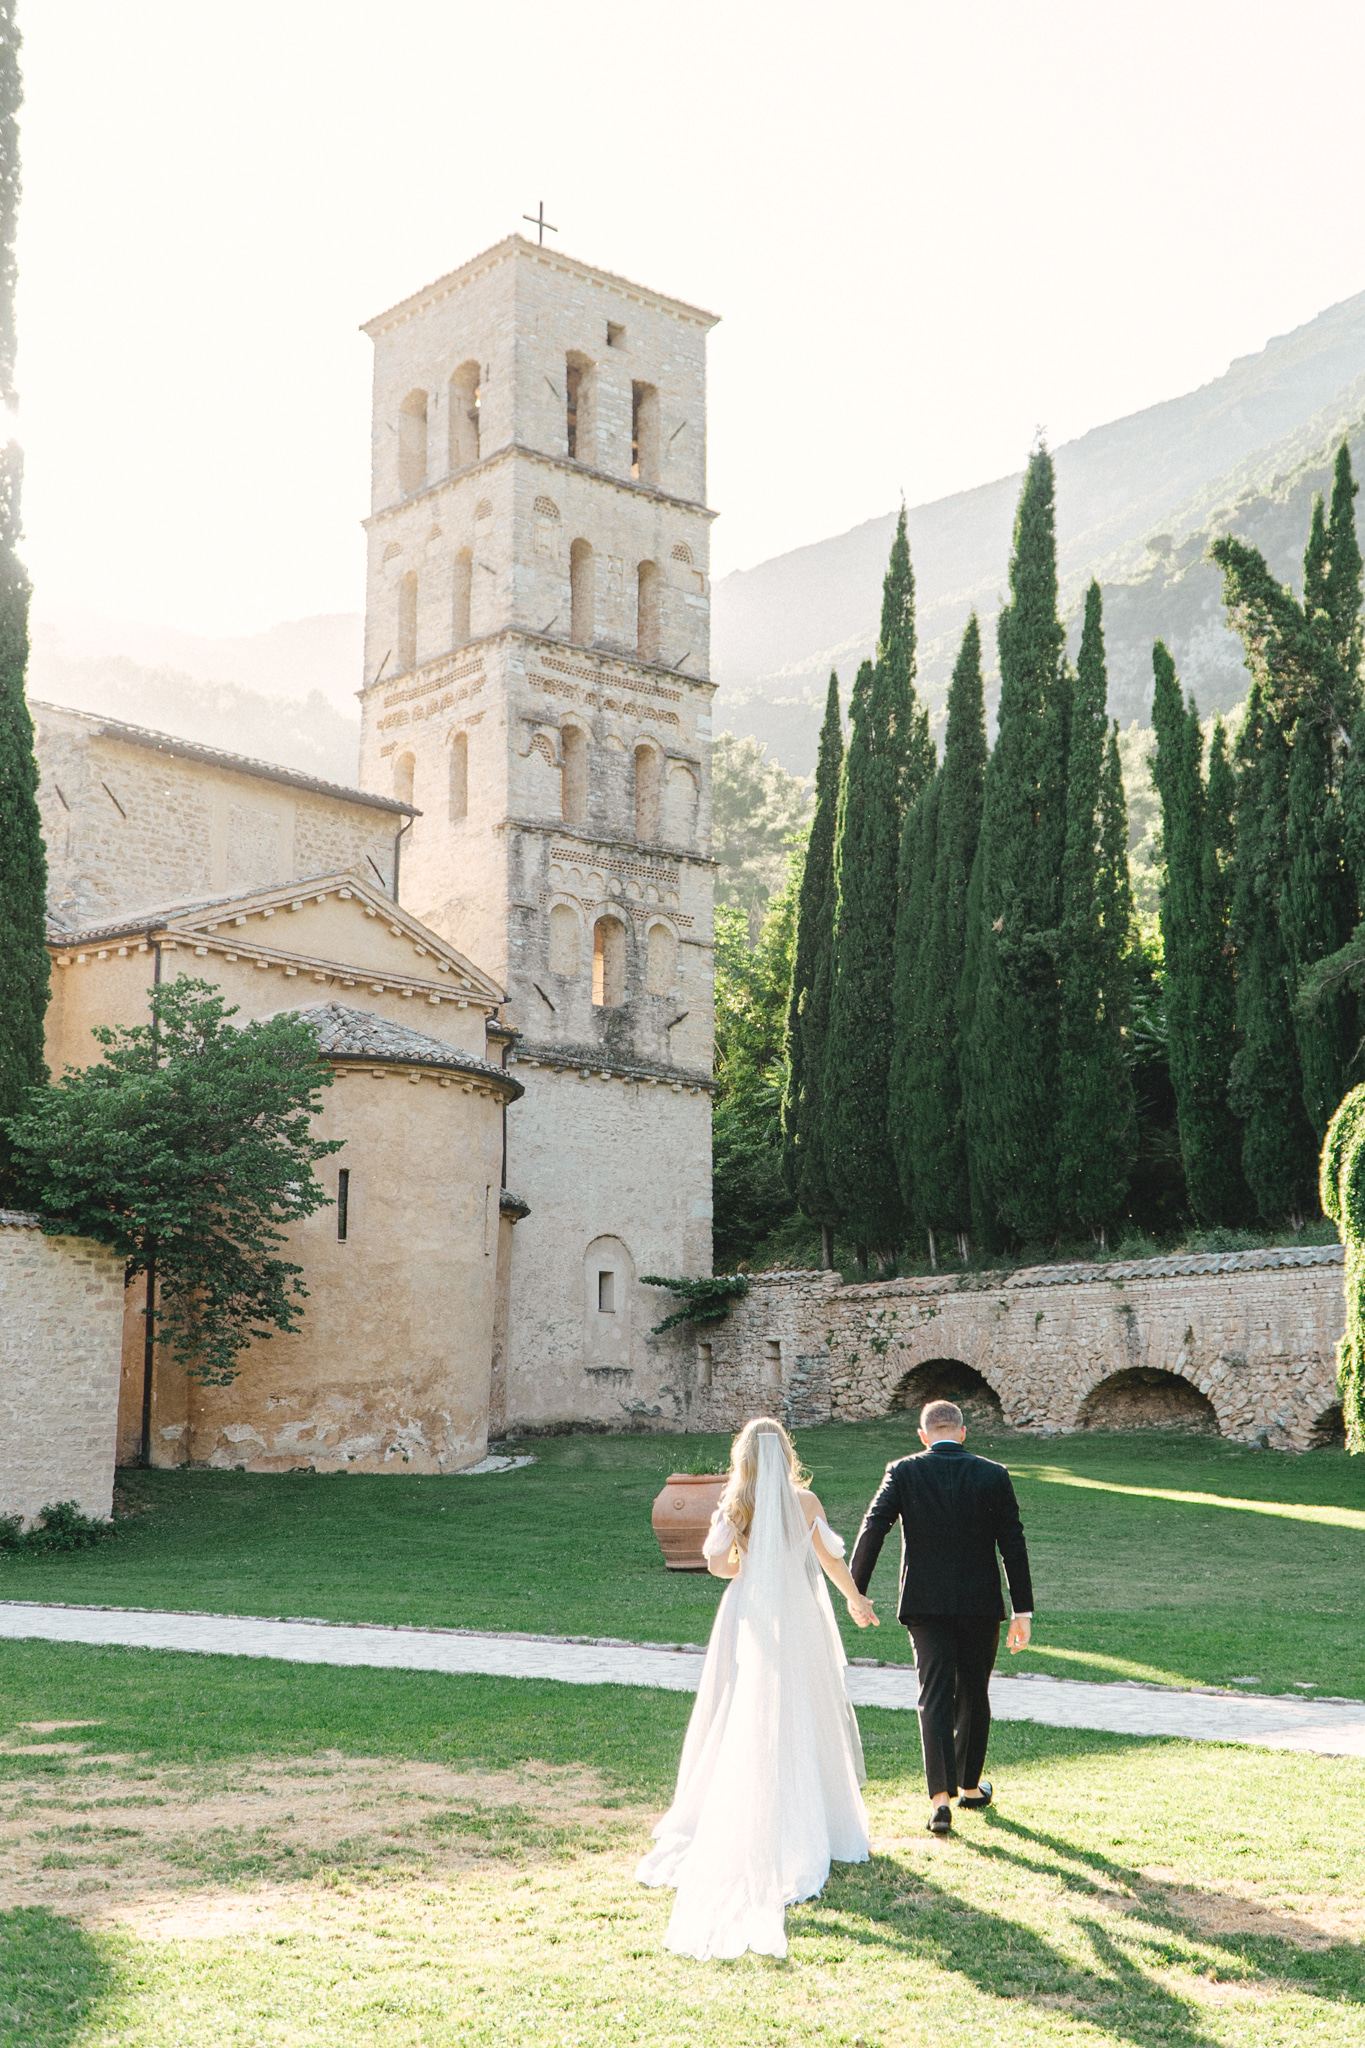 Wedding couple getting married in front of 15 people overlooking a green valley at Abbazia San Pietro in Valle, image taken by Kelley Williams a wedding photography in Umbria Italy